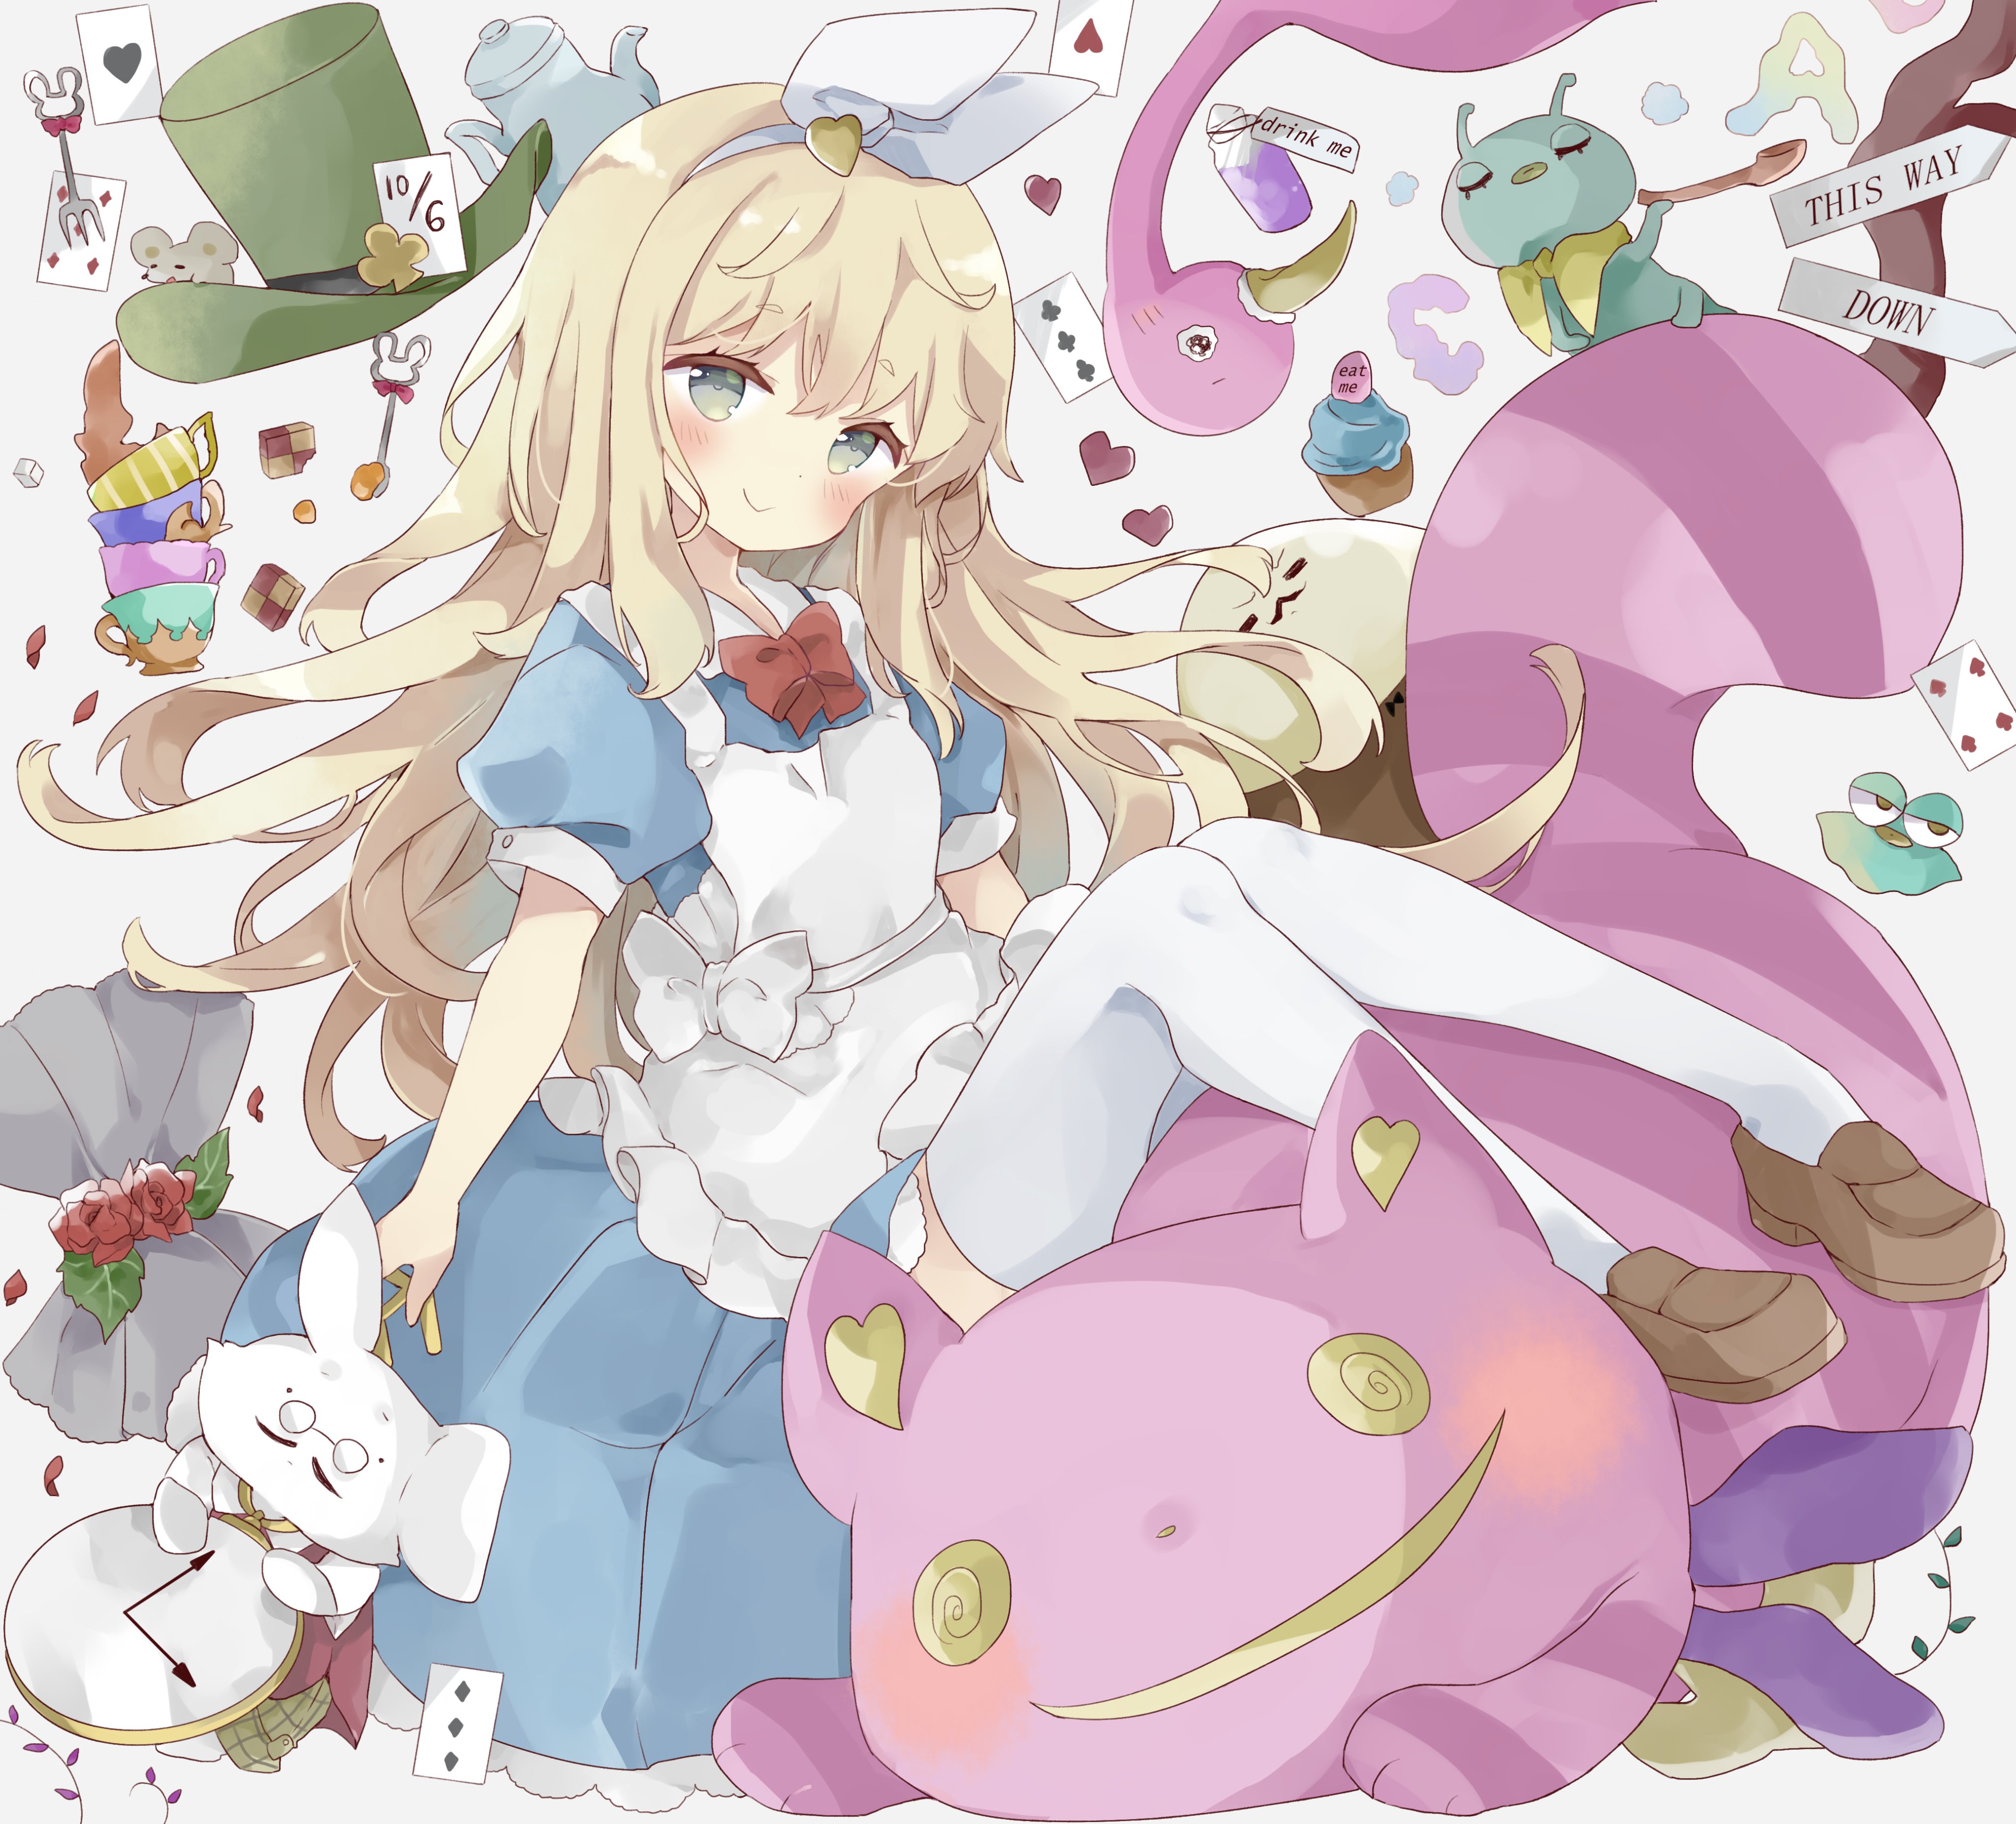 alice in wonderland anime mad hatter as a girl